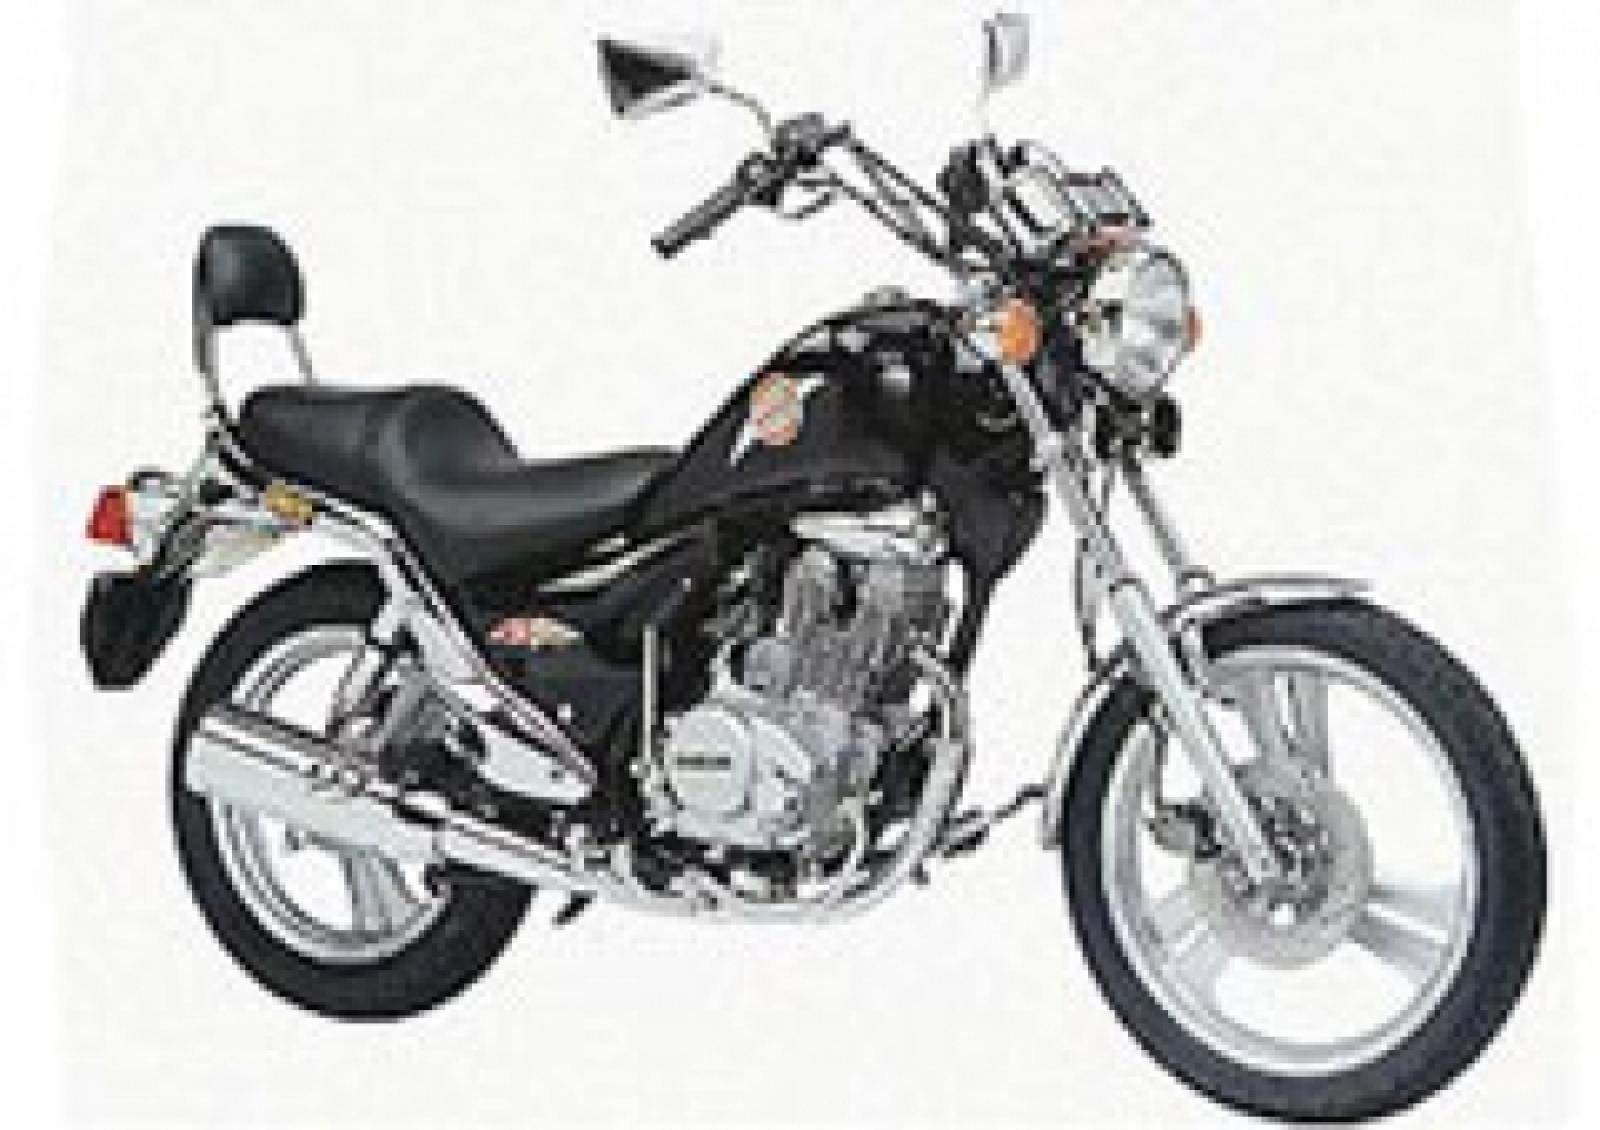 Daelim 125 vs 1997 | about motorcycles